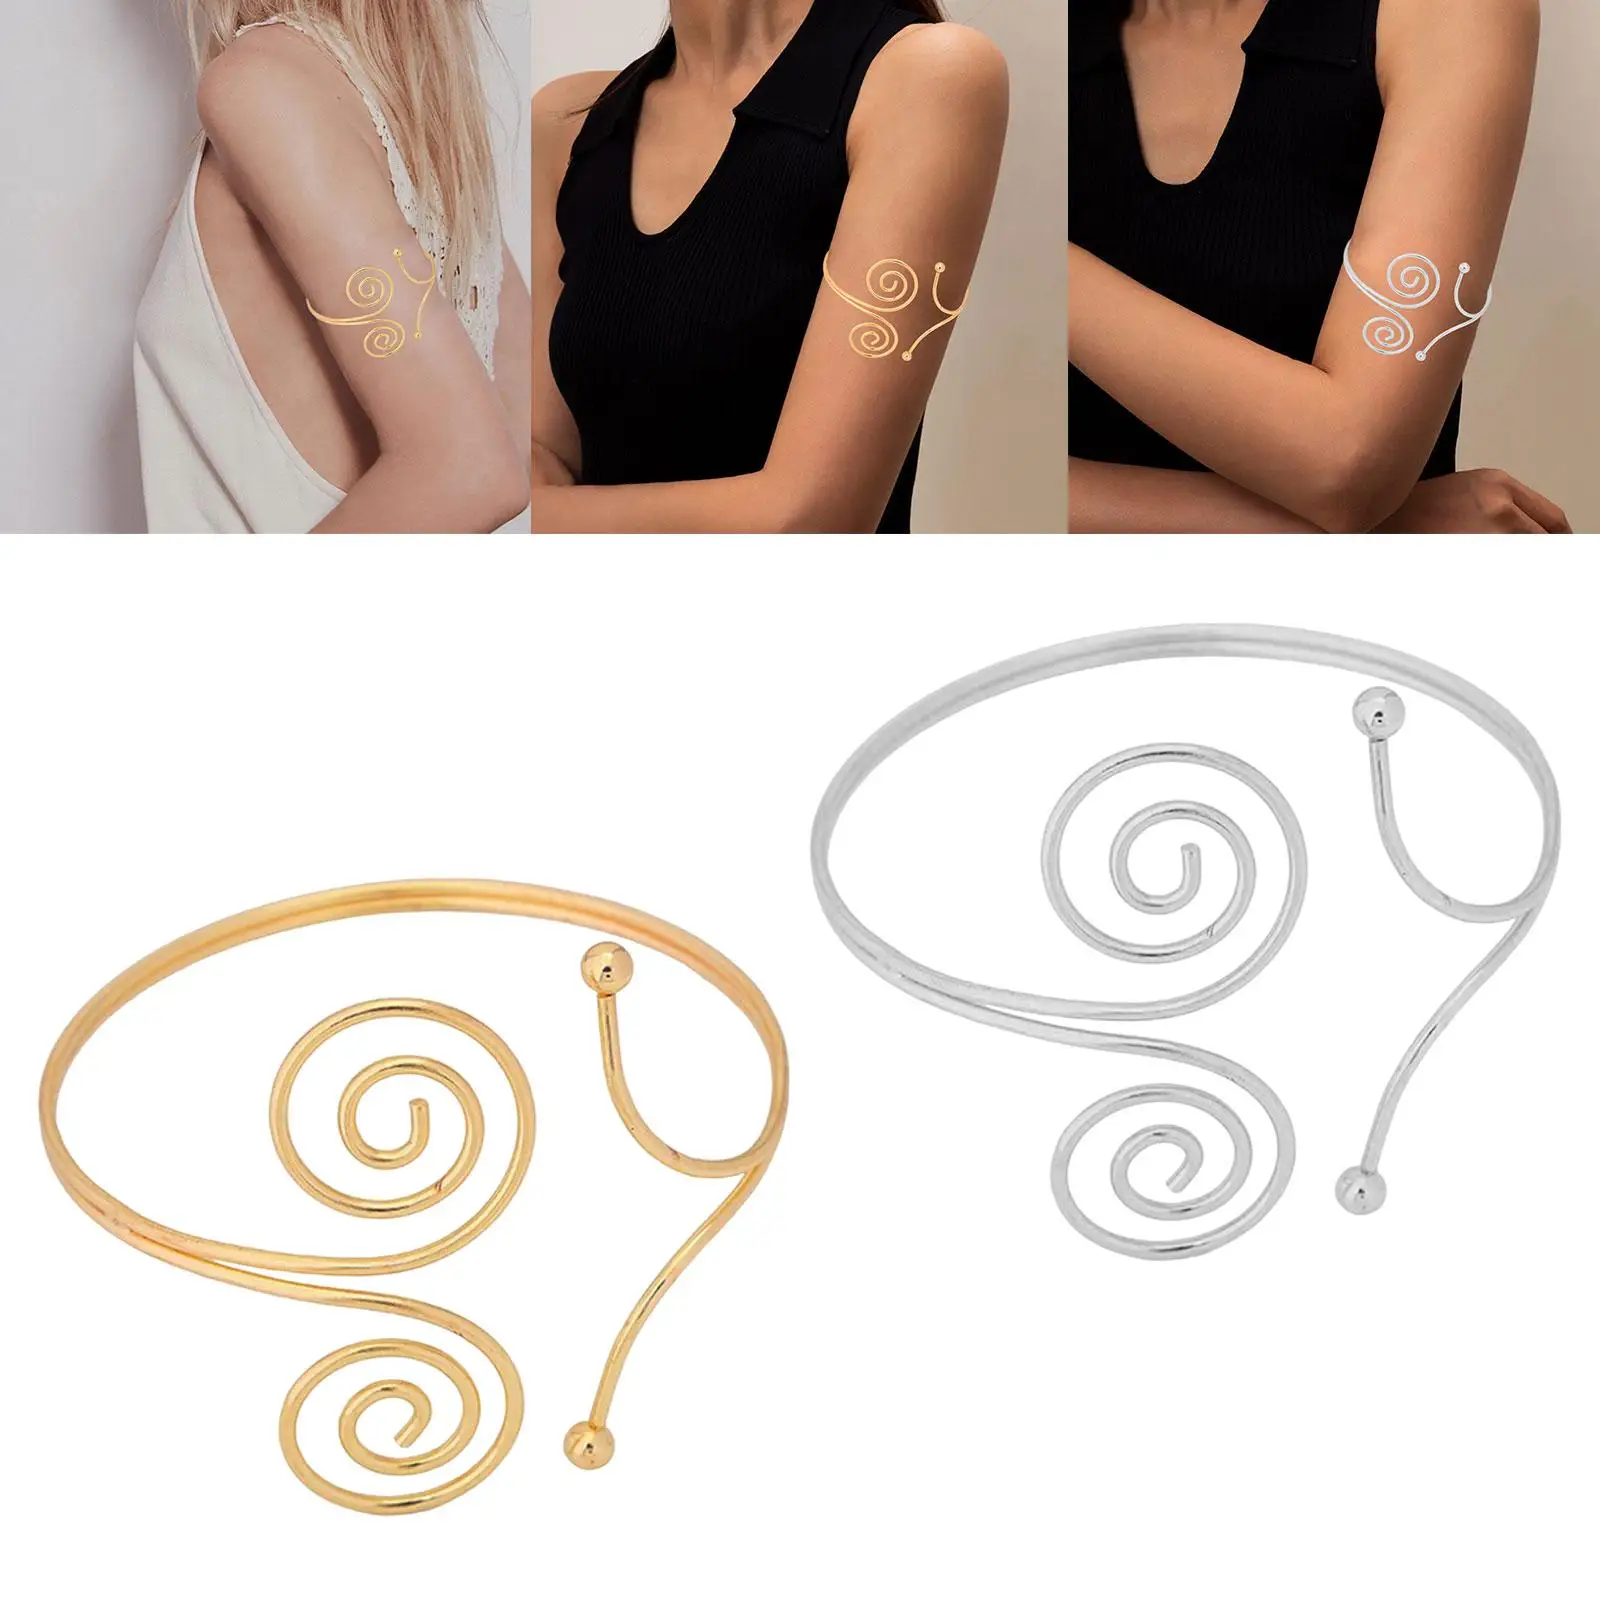 Coiled Spiral Upper Arm Cuff Bracelet Bangle Adjustable Armlet for Everyday wearing Festival Wedding Party Make You Charming